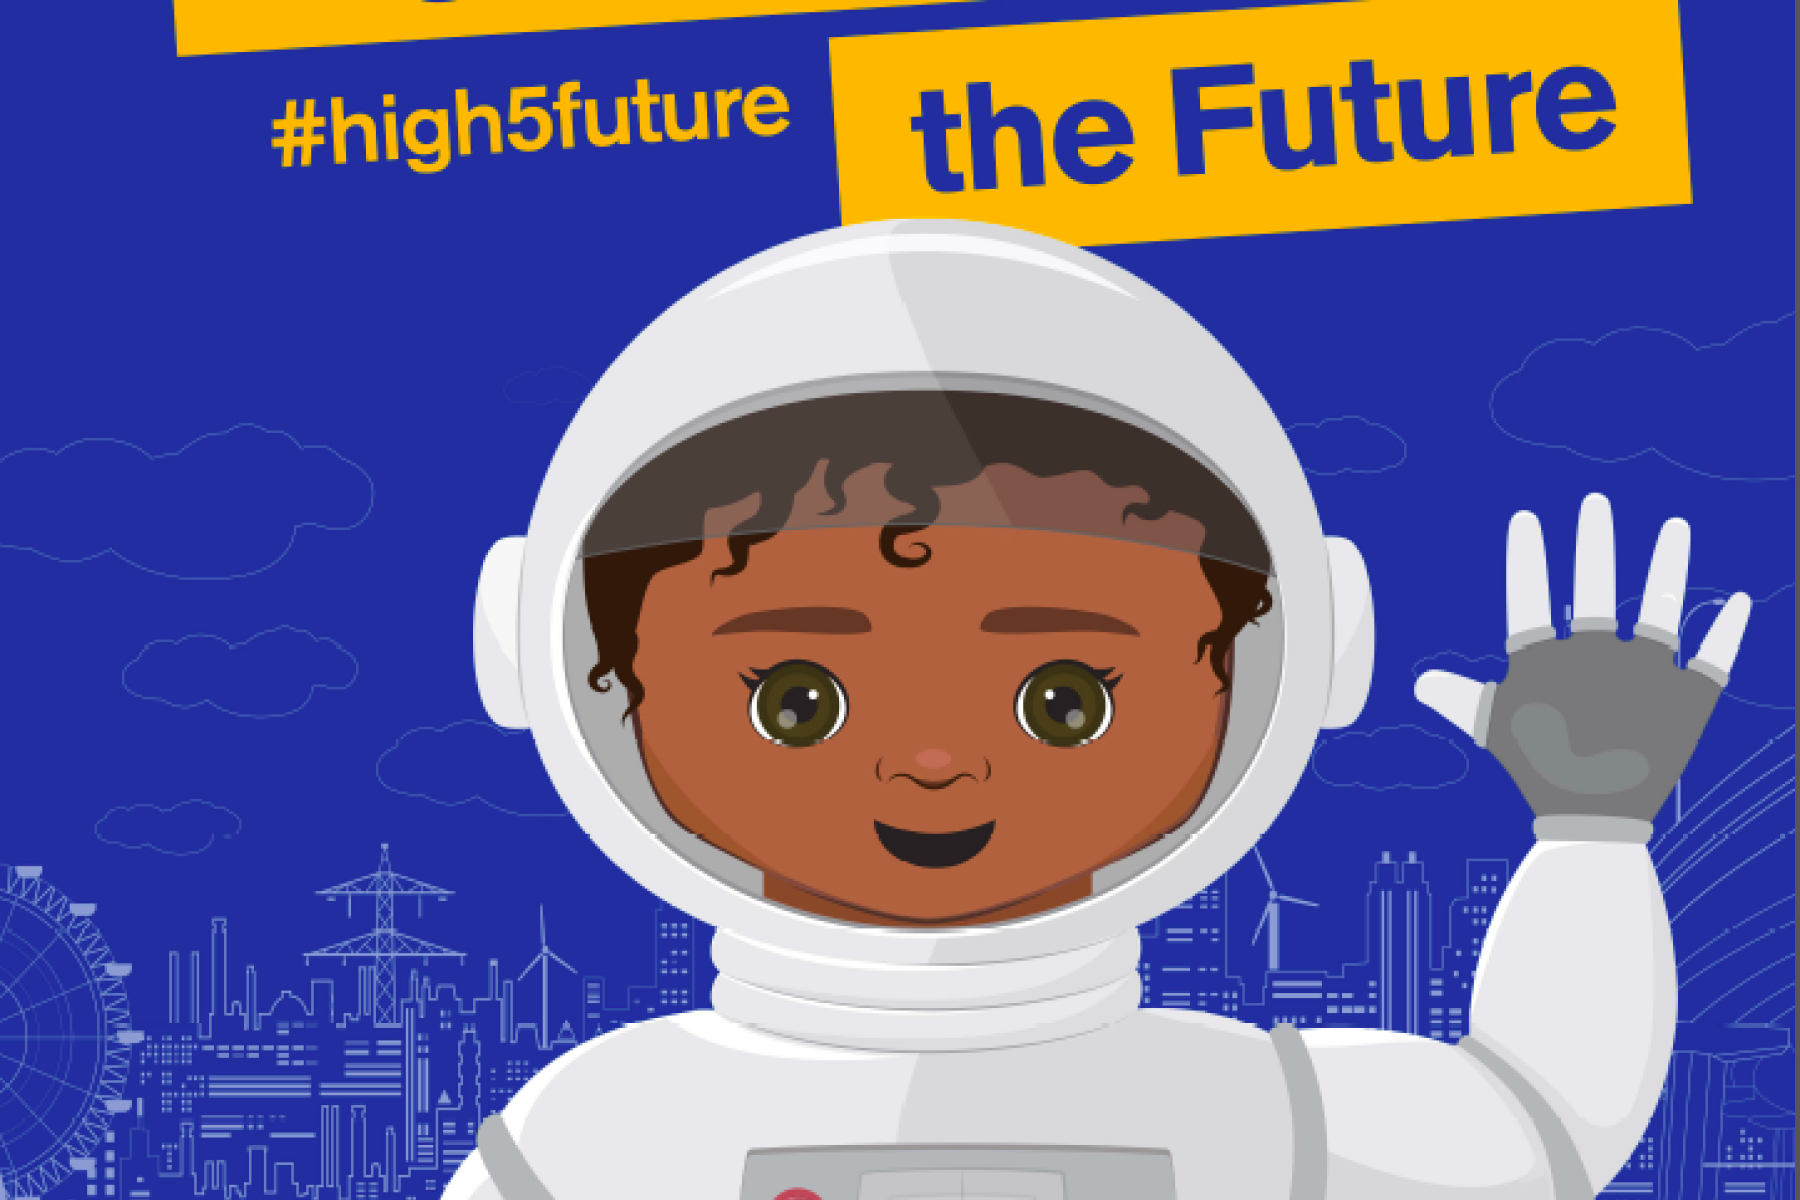 Illustration of a person in an astronaut suit holding up their hand for a high five